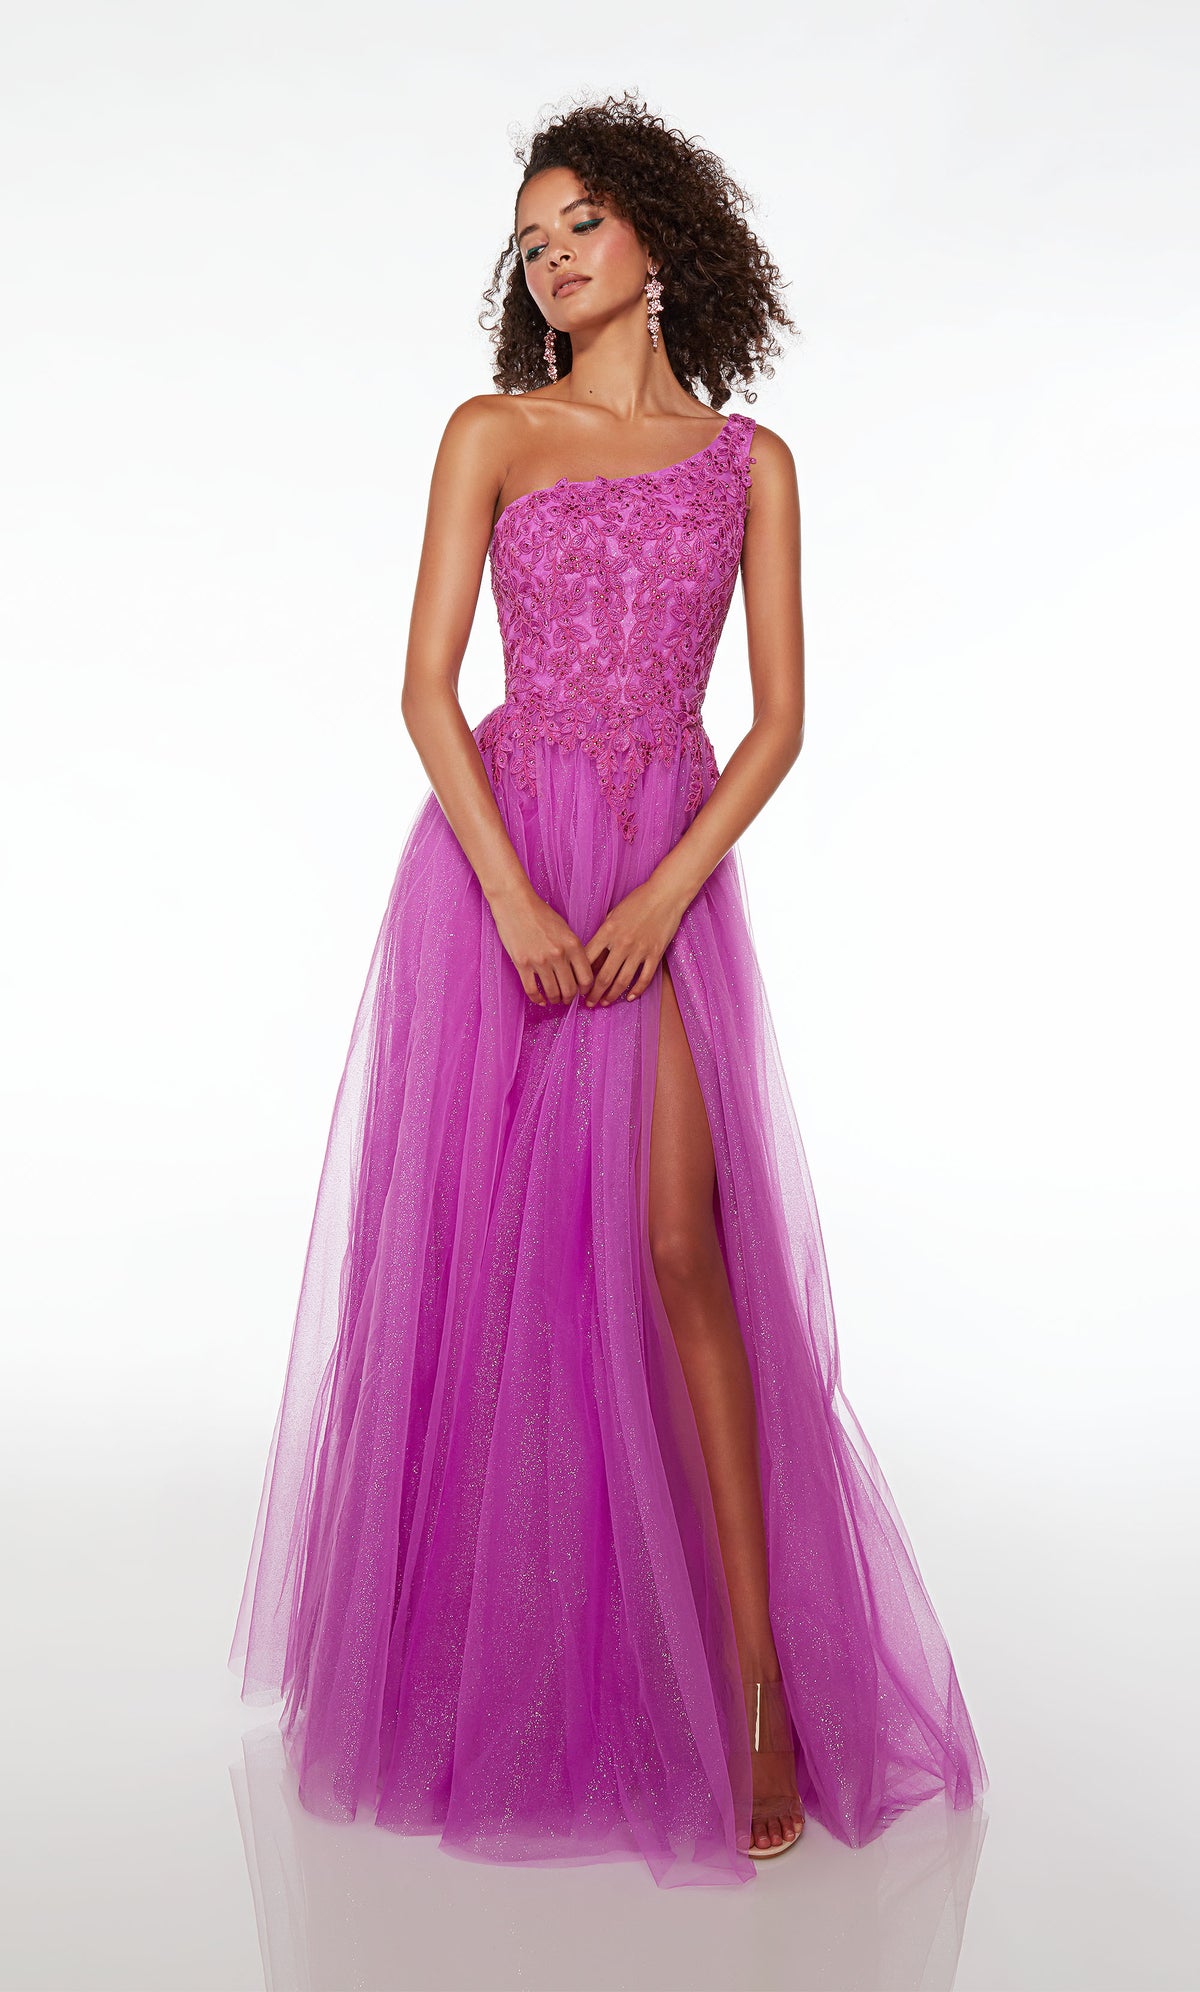 Neon purple colored one-shoulder prom dress: lace bodice, glitter tulle skirt, high slit, and lace-up back for the perfect fit and an stylish, elegant look.